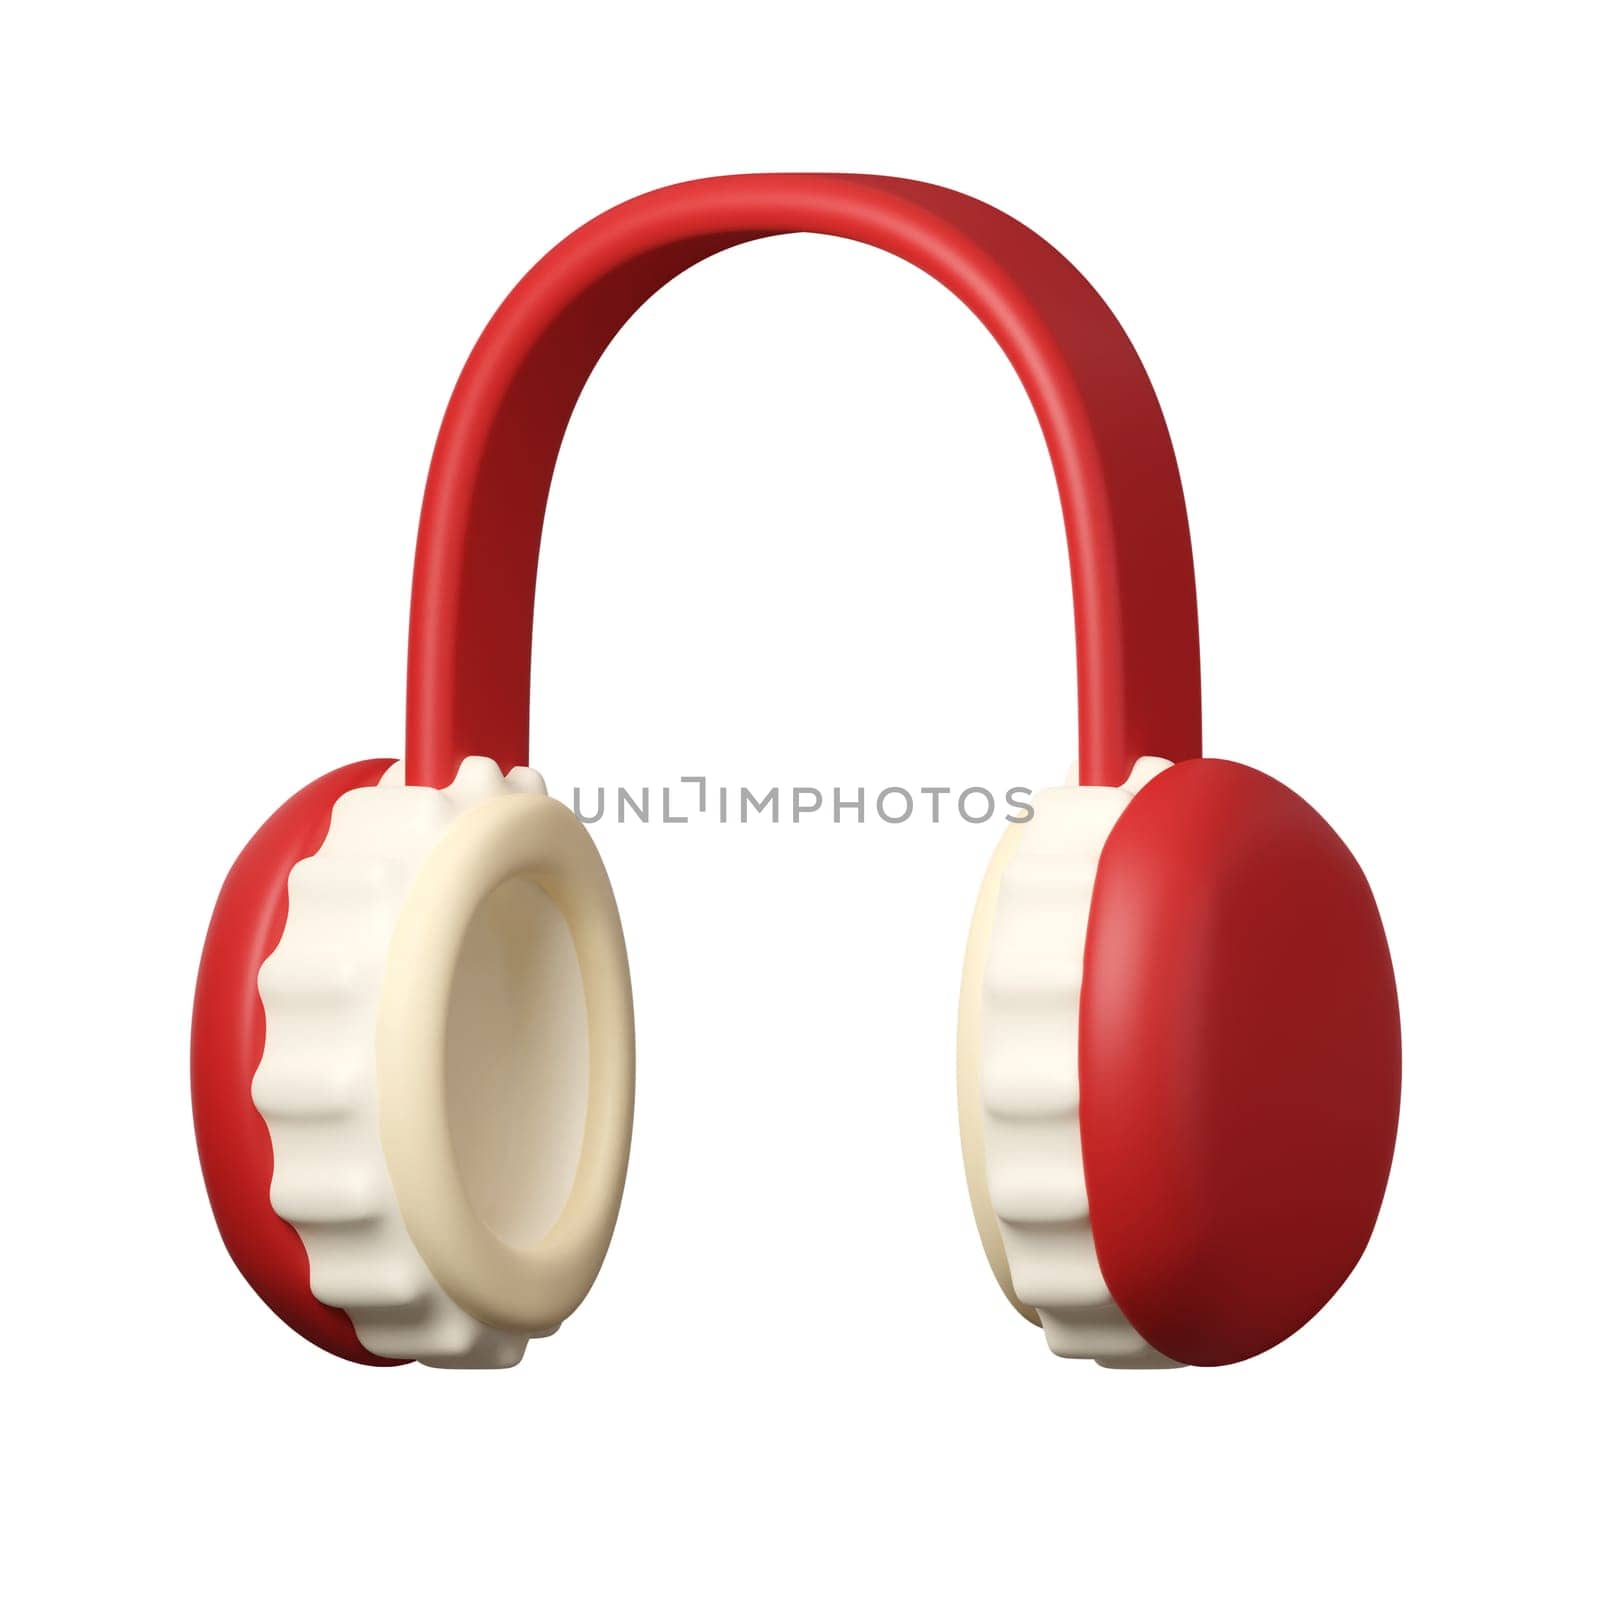 3d Christmas warm headphones icon. minimal decorative festive conical shape tree. New Year's holiday decor. 3d design element In cartoon style. Icon isolated on white background. 3d illustration by meepiangraphic